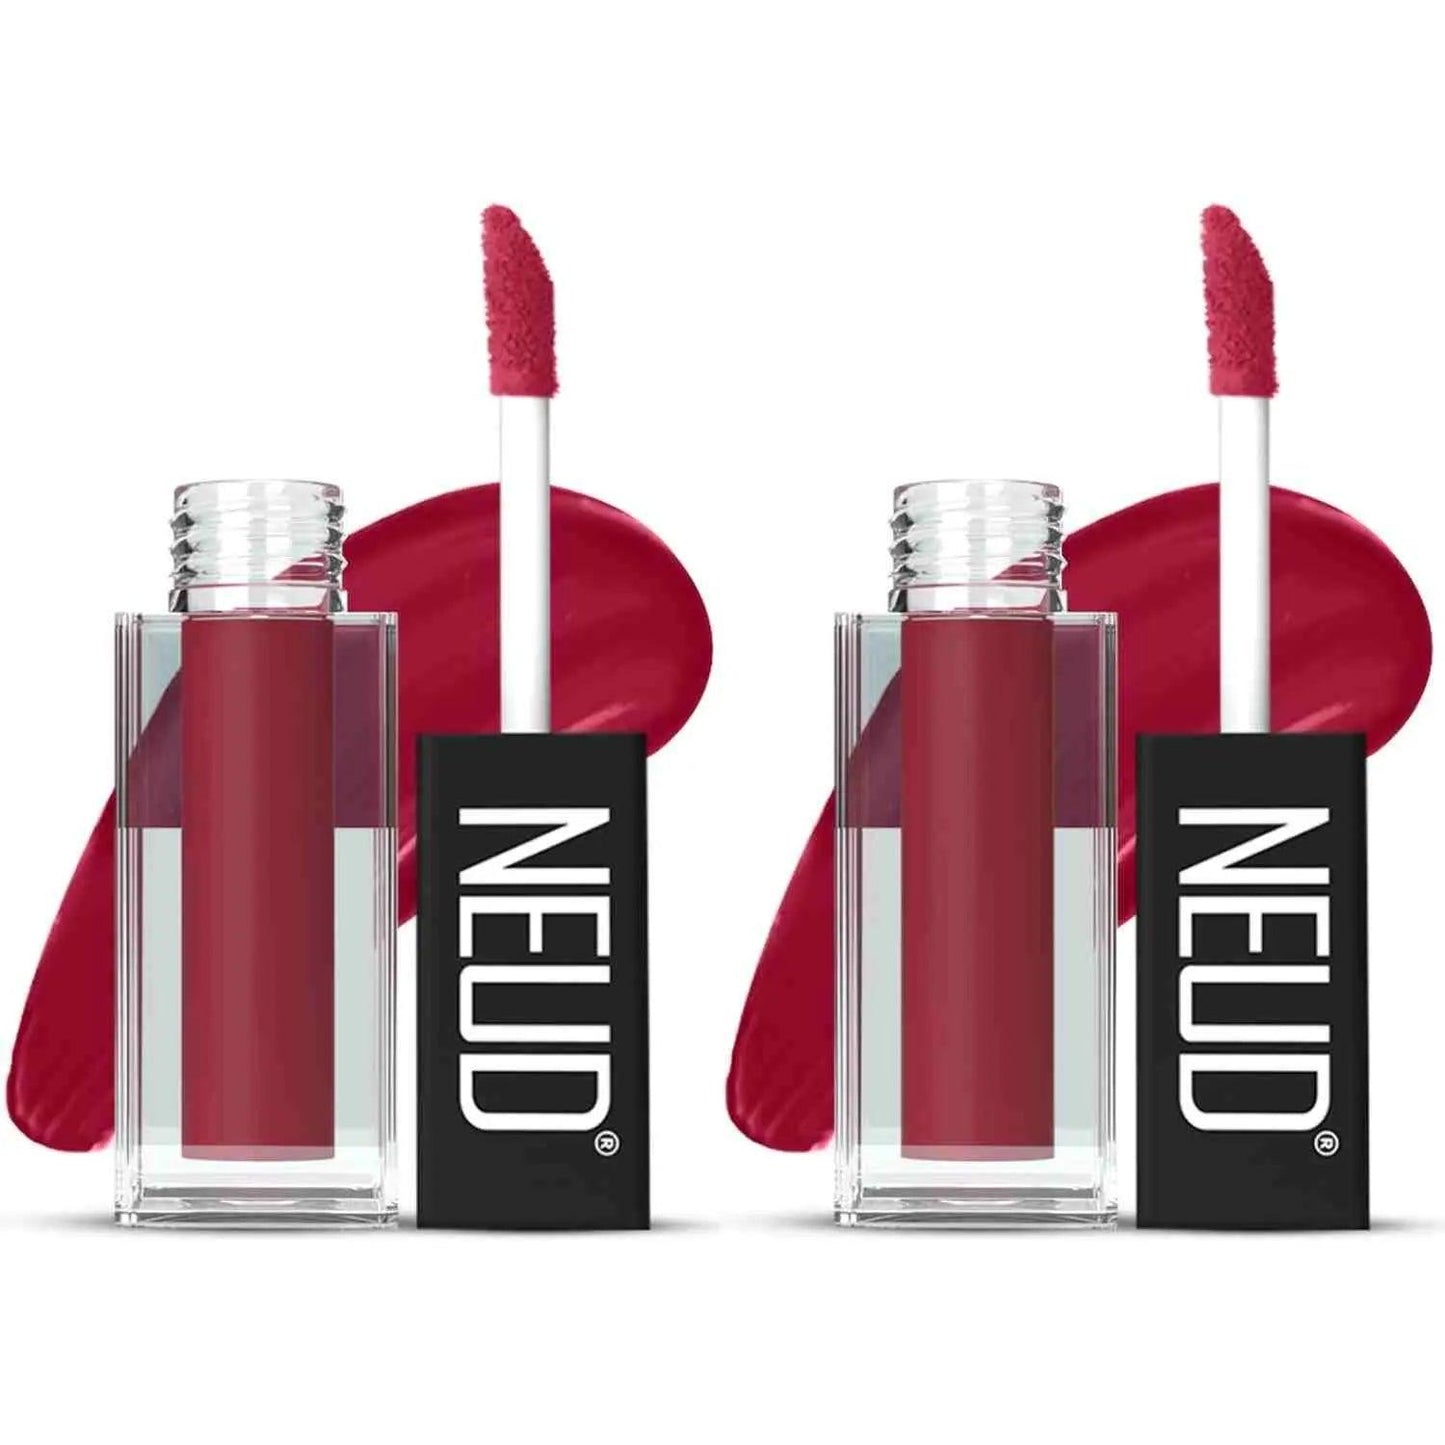 NEUD Matte Liquid Lipstick Peachy Pink with Jojoba Oil, Vitamin E and Almond Oil - Smudge Proof 12-hour Stay Formula with Free Lip Gloss 7419870355777